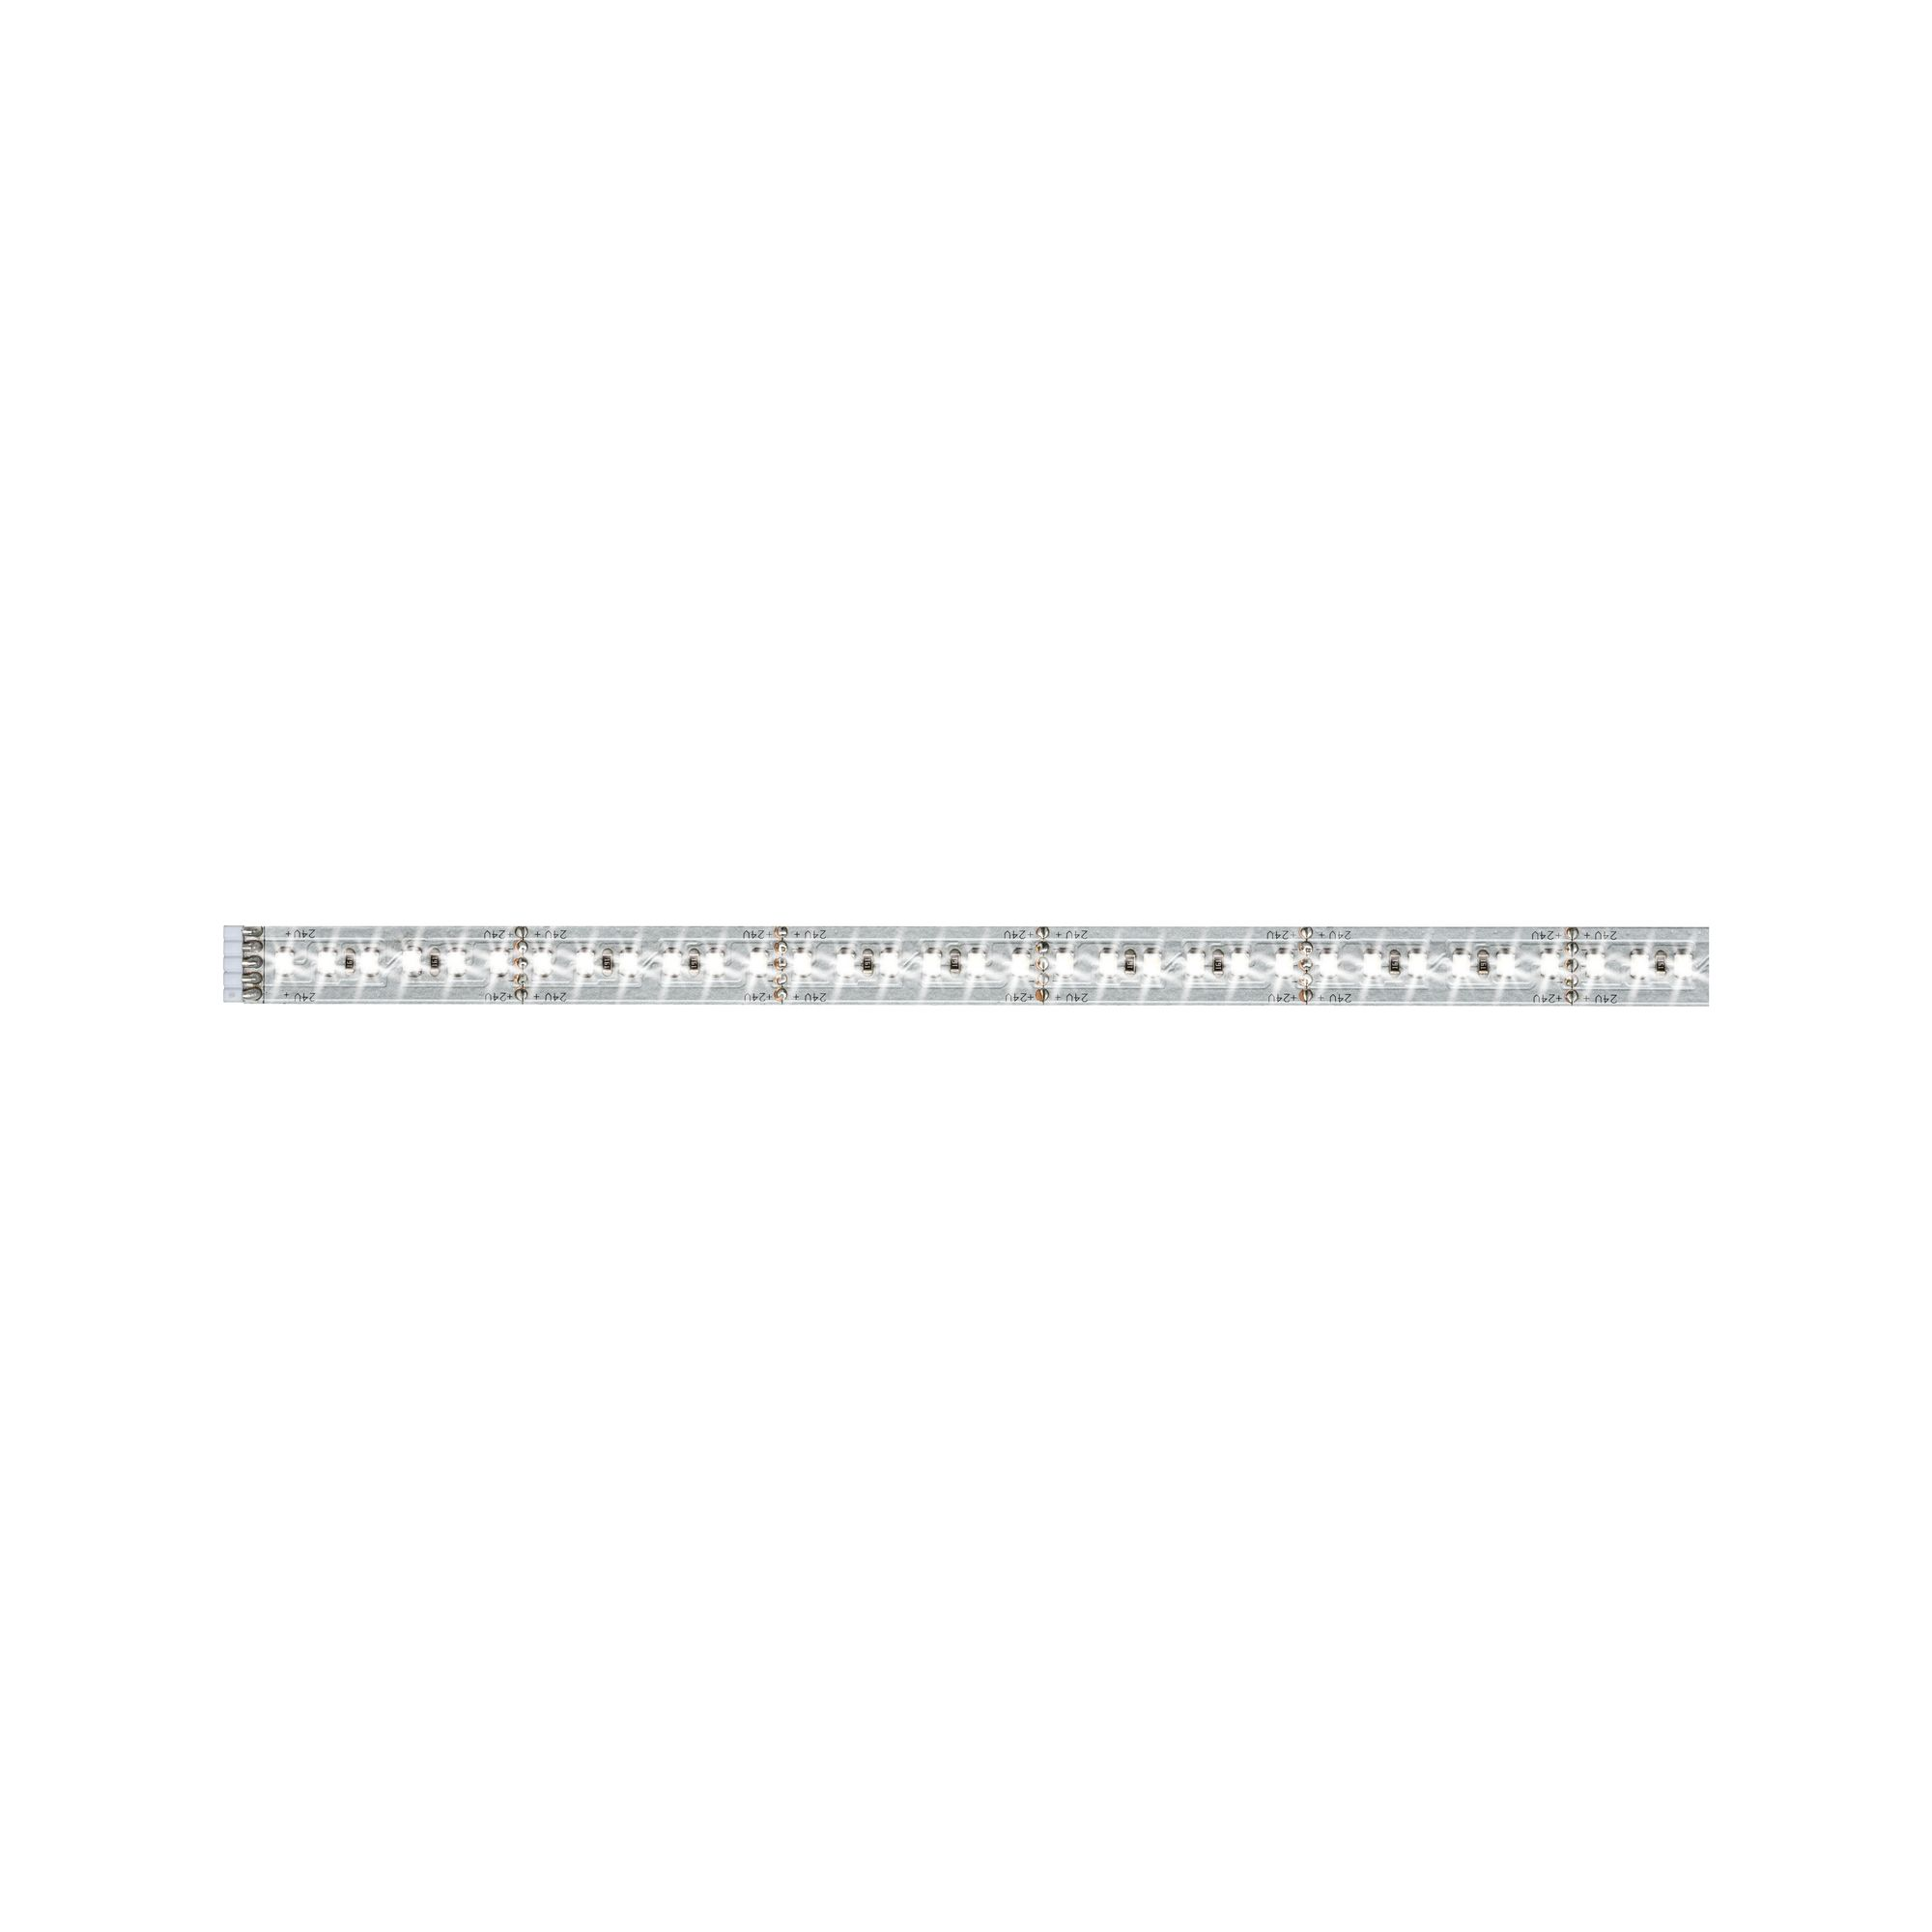 Function Max LED 1000 Strip 1 m Tageslichtweiß 11,5 W 24 V Silber + product picture